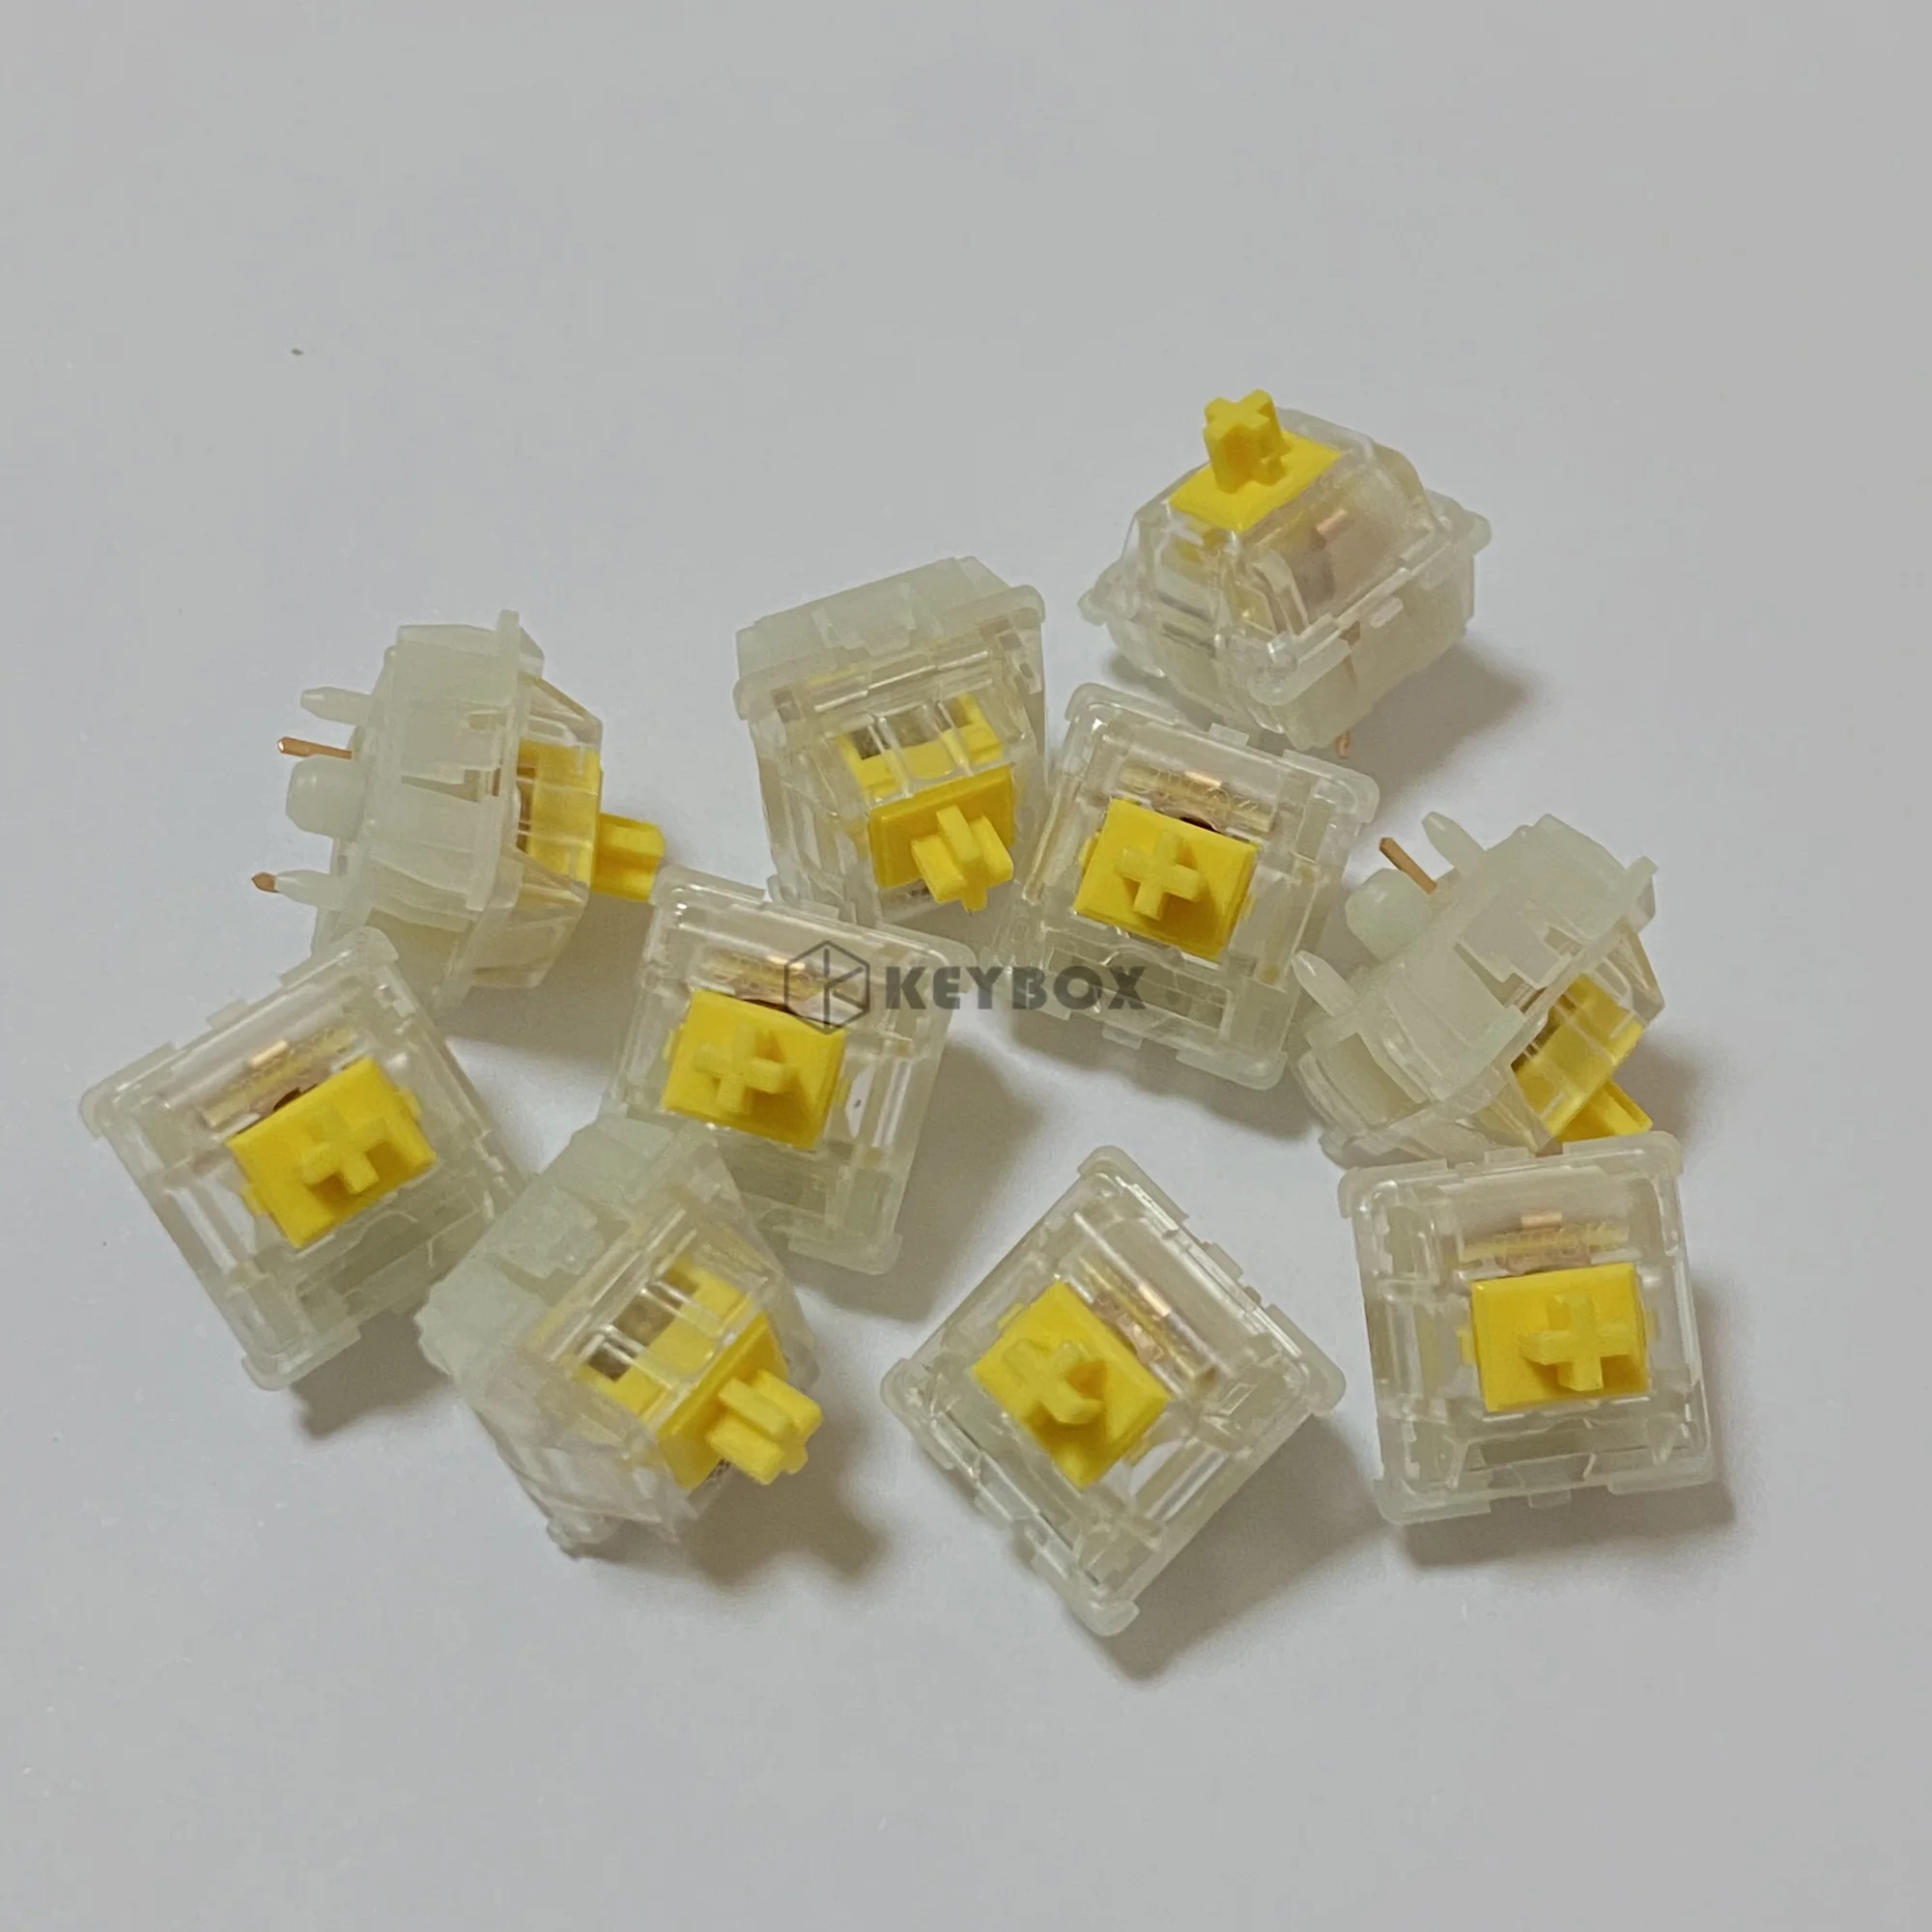 EverGlide Linear Switches White Yellow Red Switches By JWK JWICK keyboard with touchpad for pc